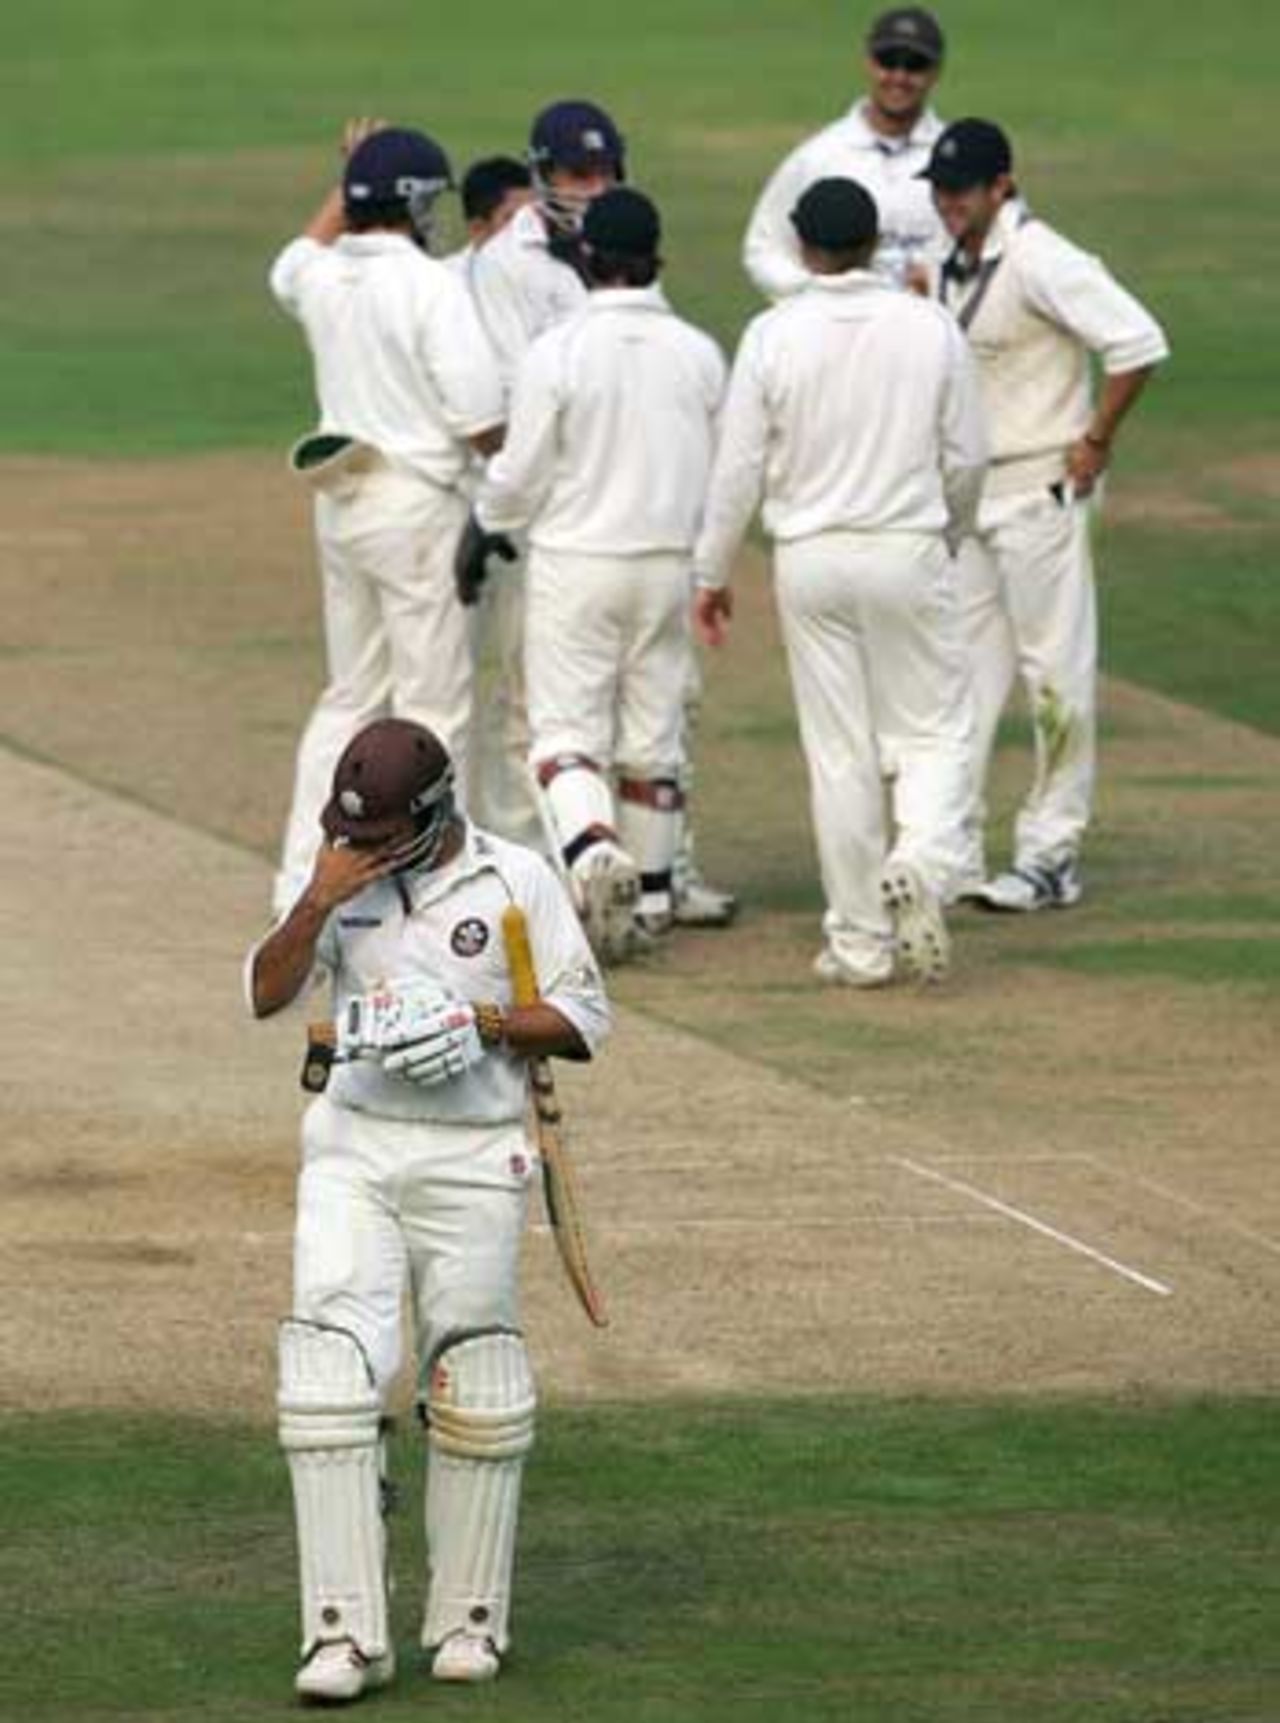 Middlesex players celebrate the dismissal of Scott Newman, whose wicket ensured Surrey's demotion to the Division Two, Surrey v Middlesex, The Oval, September 22, 2005